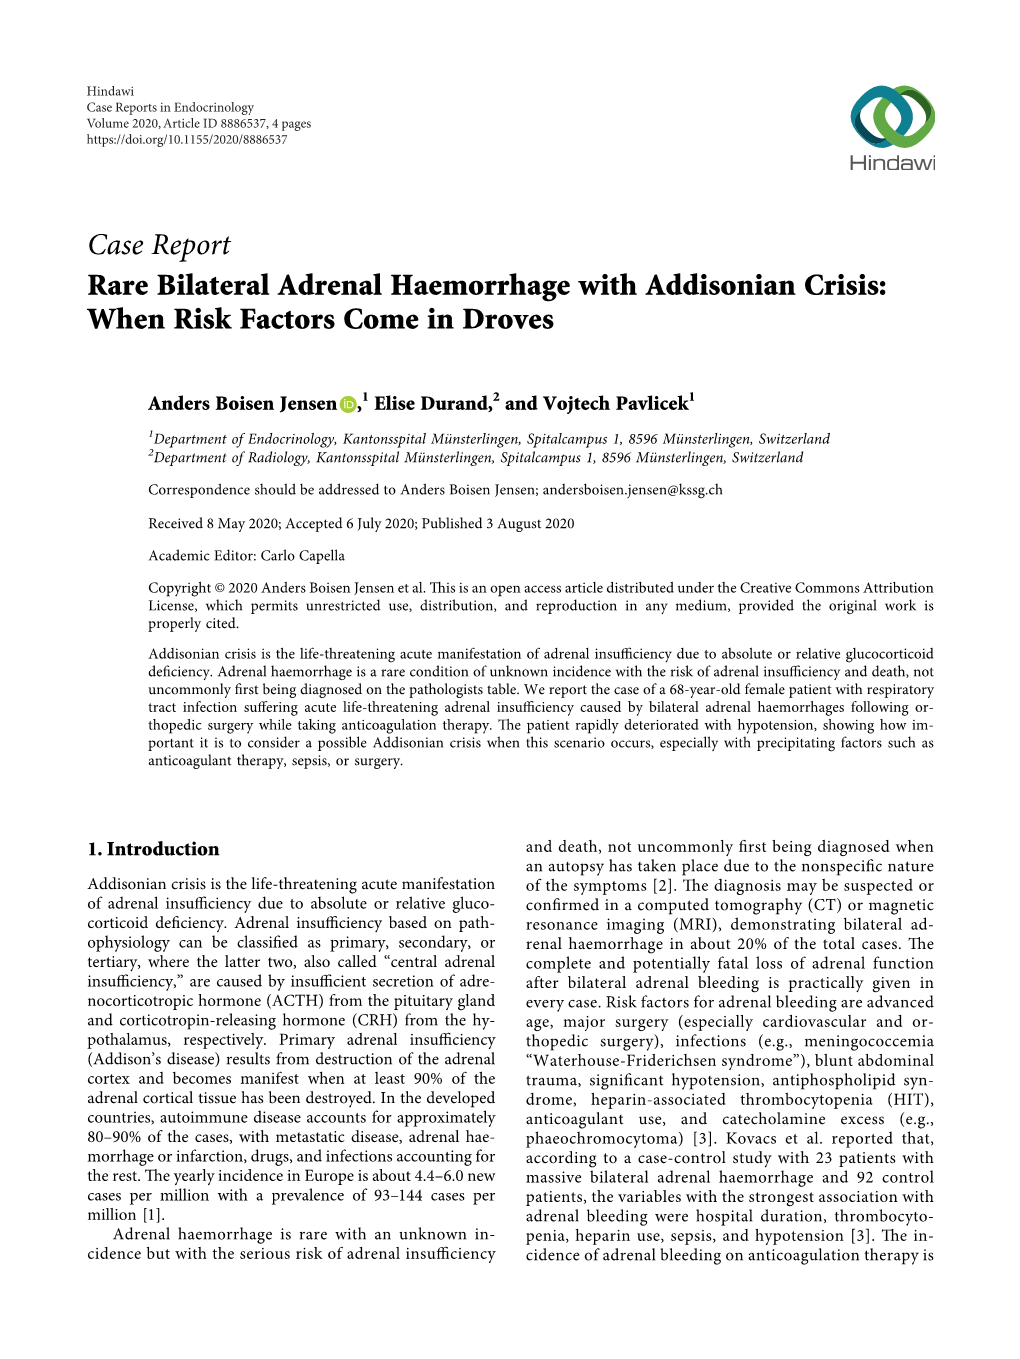 Rare Bilateral Adrenal Haemorrhage with Addisonian Crisis: When Risk Factors Come in Droves